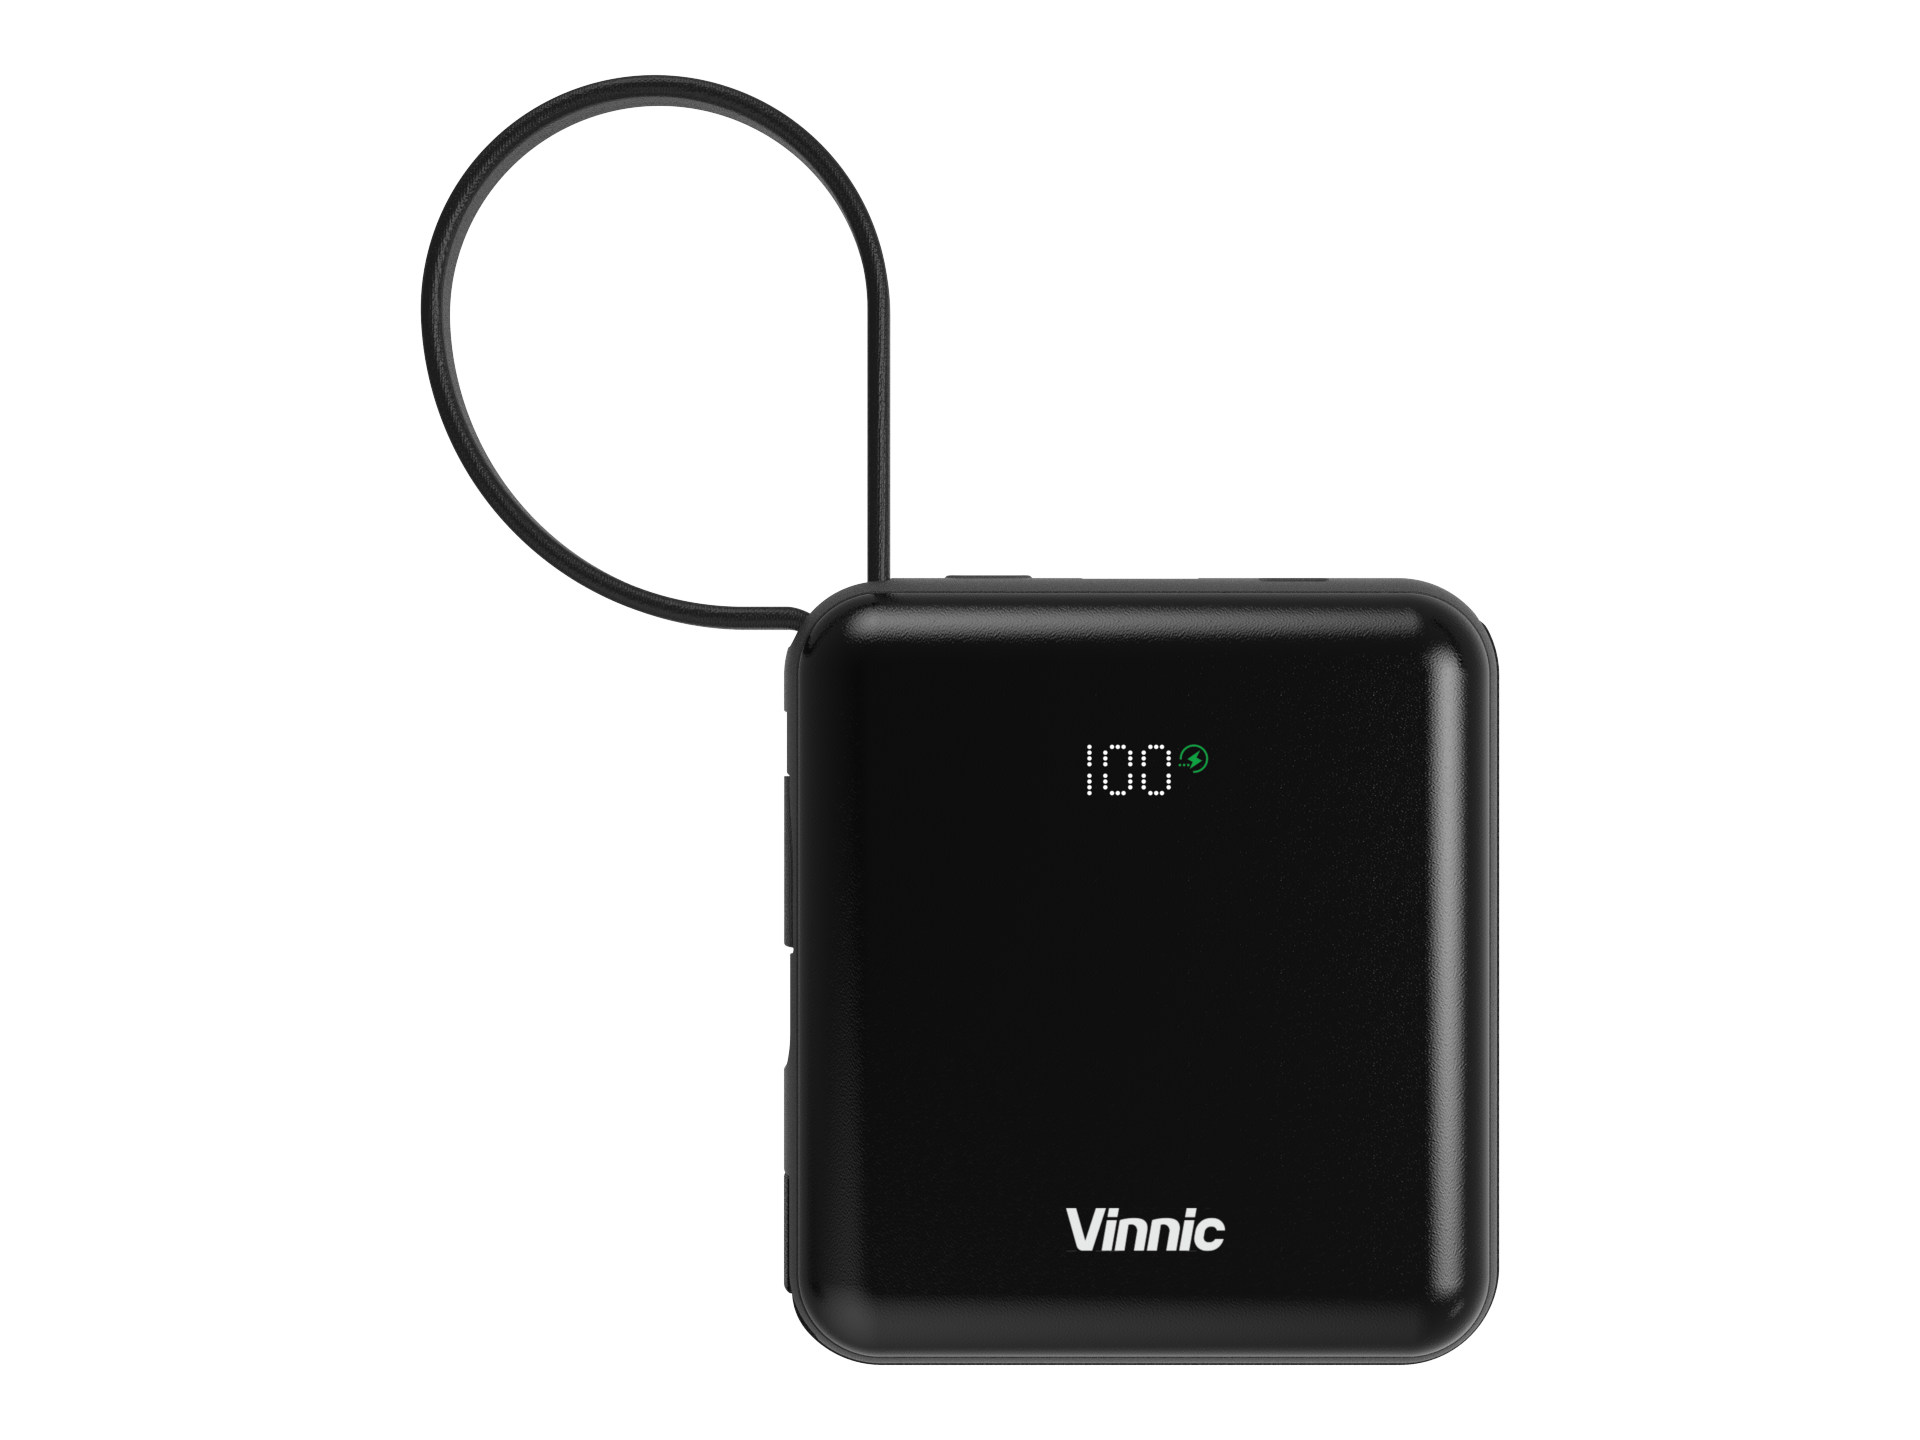 [Combo Deal] Vinnic Damavand Fast Charge 10,000mAh Built-in Cables PD QC Powerbank - Graphite & Navy